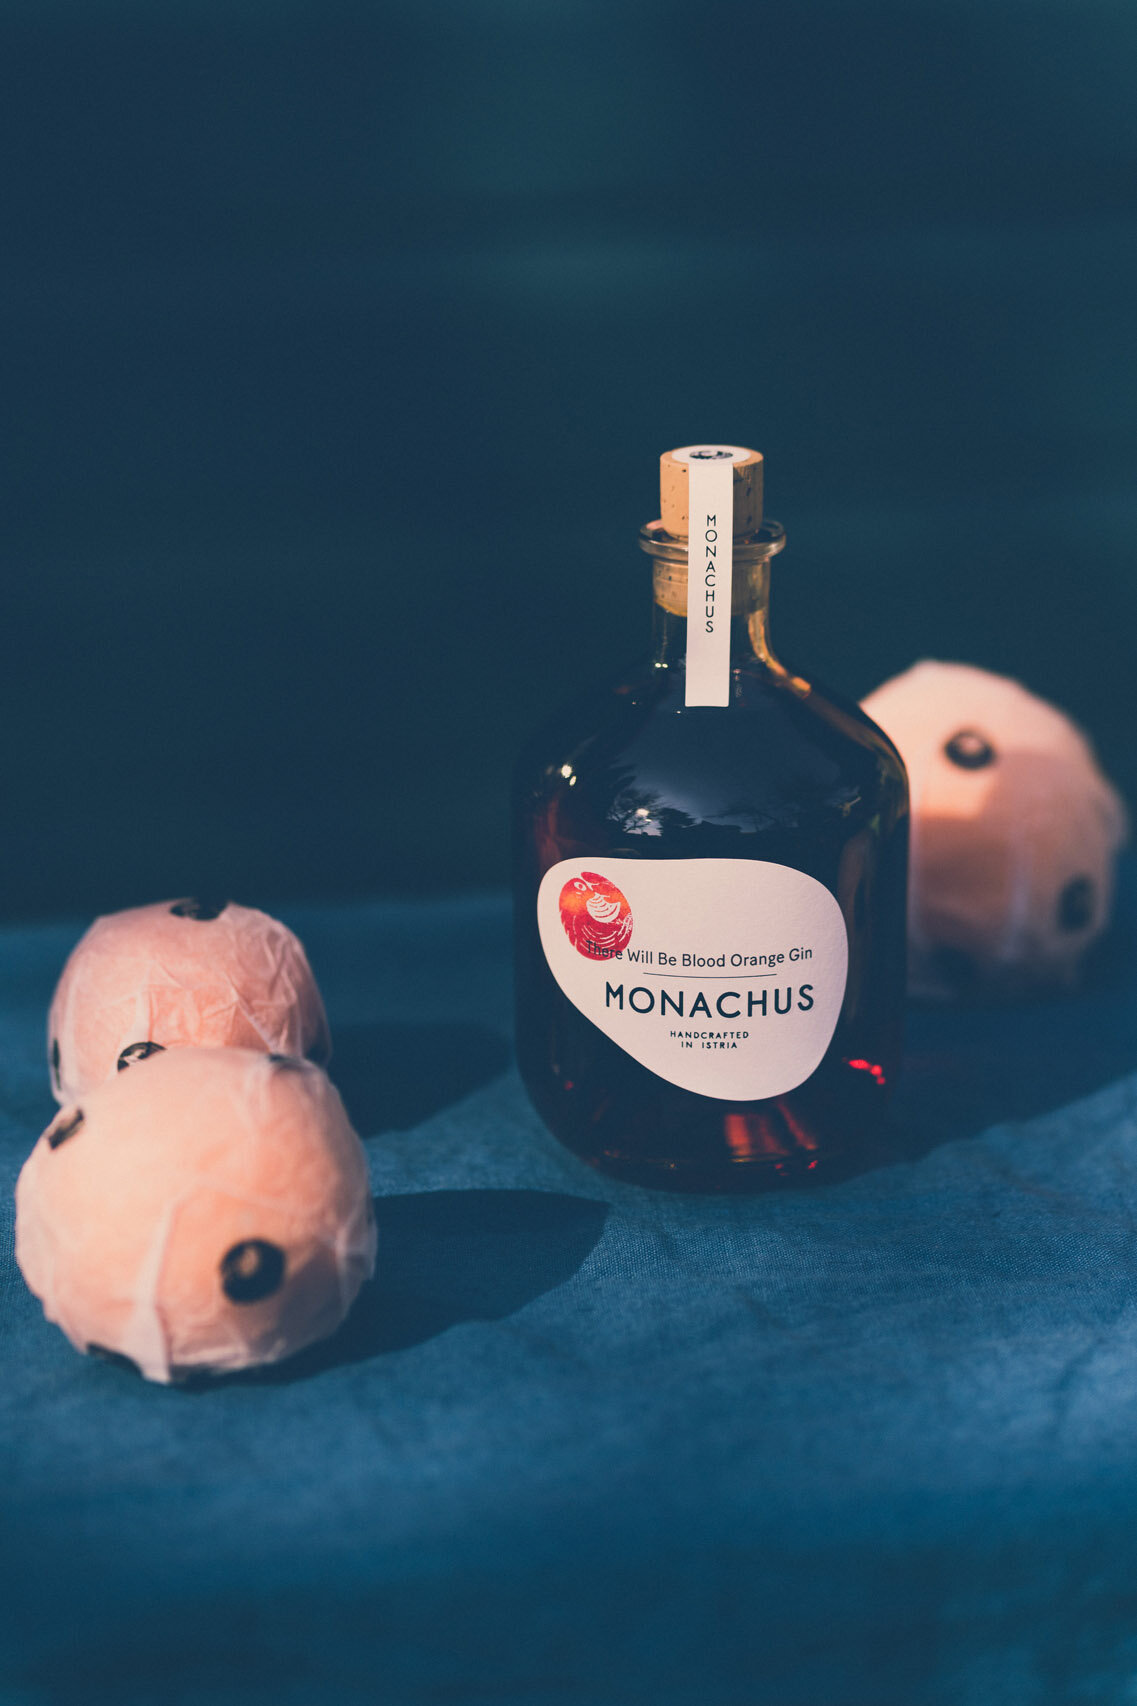 Monachus There Will Be Blood Orange Gin